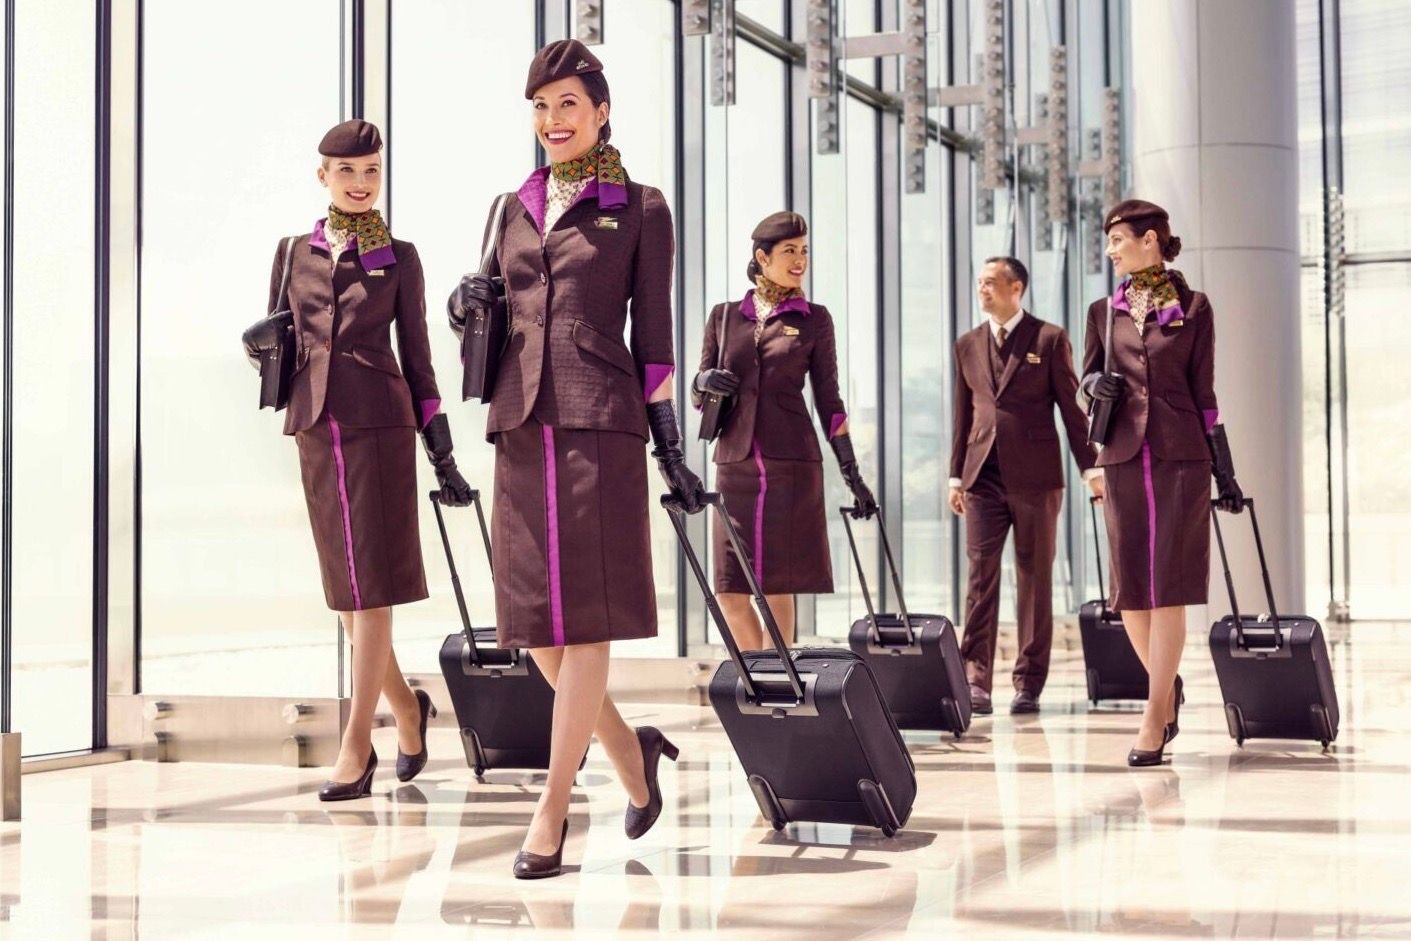 Several Etihad Airways cabin crew members walking through an airport with suitcases.